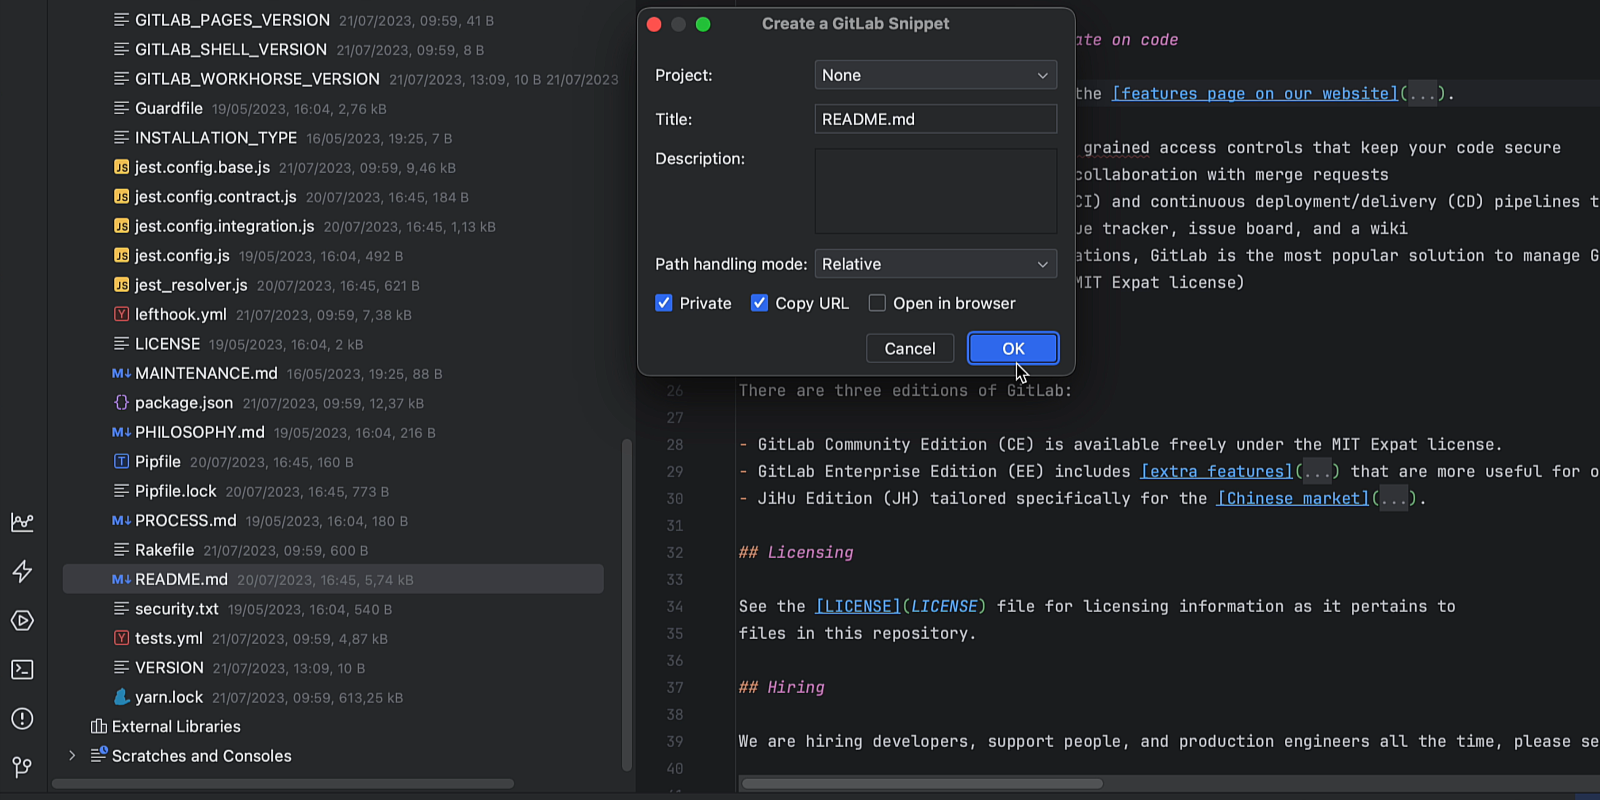 Image showing the support for the Gitlab snippets in WebStorm 2023.3